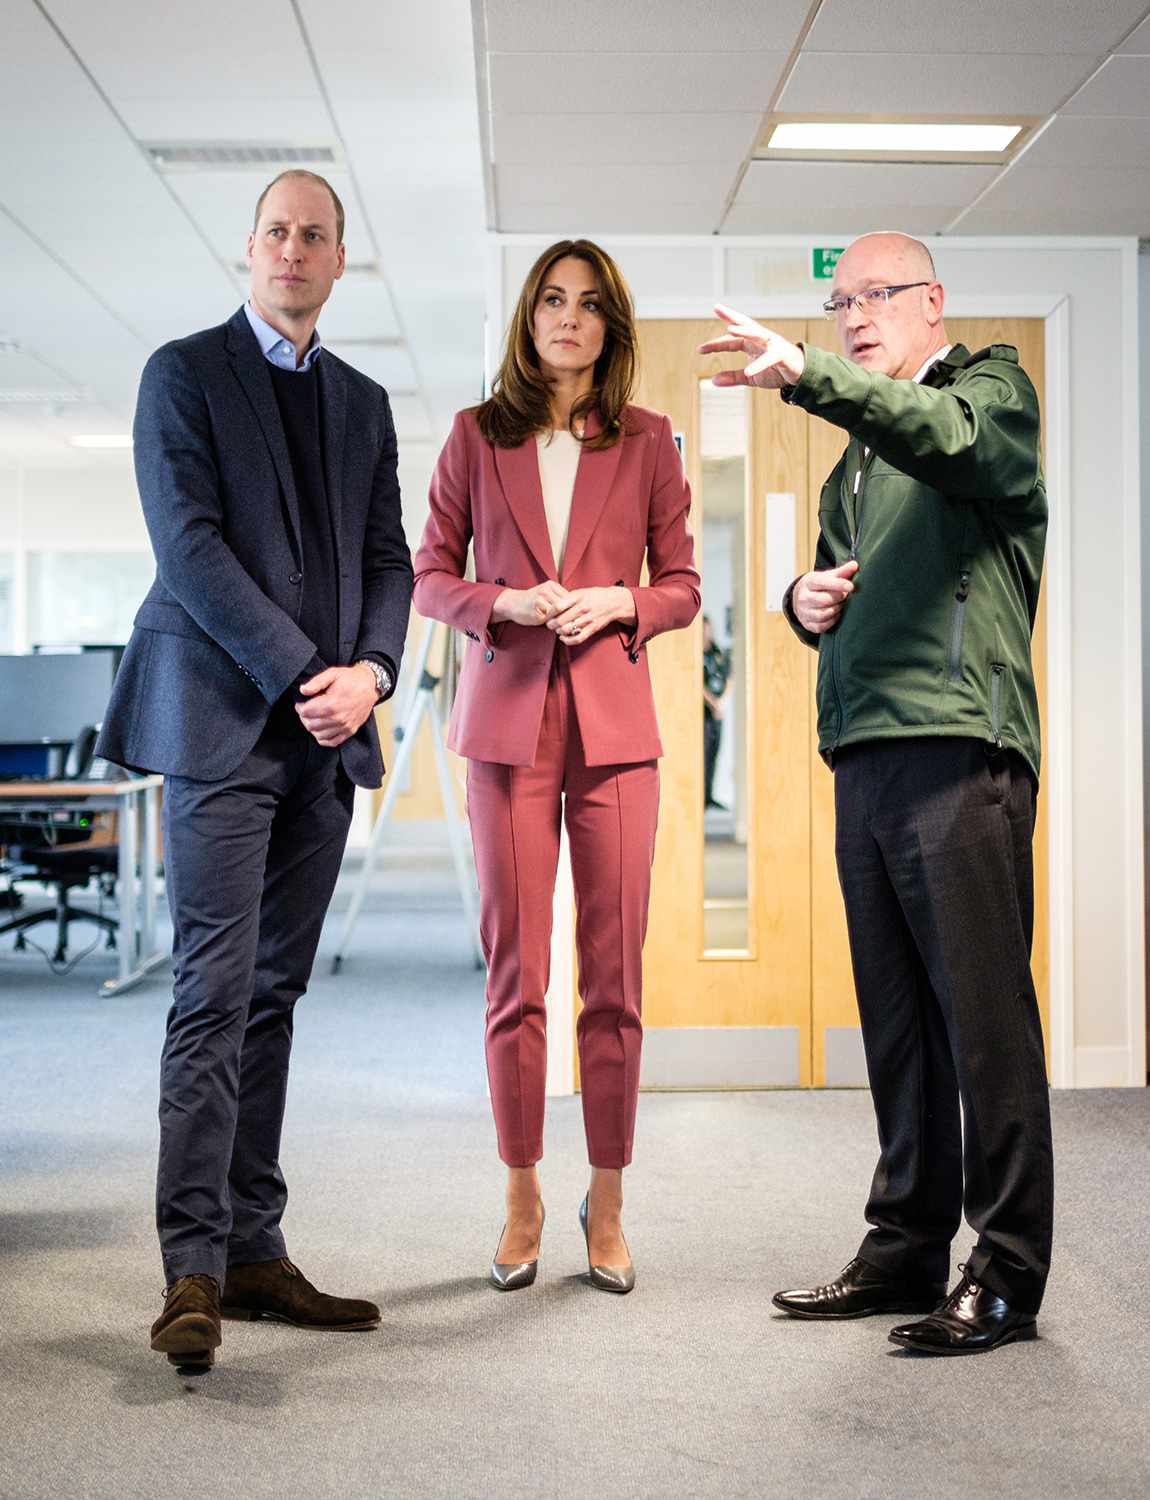 Palace of the Duke and Duchess of Cambridge talking with Chief Executive of the London Ambulance Service, Garrett Emmerson, and an unidentified staff member (left) during a visit to the London Ambulance Service 111 control room in Croydon on Thursday to meet ambulance staff and 111 call handlers who have been taking NHS 111 calls from the public, and thank them for the vital work they are doing.